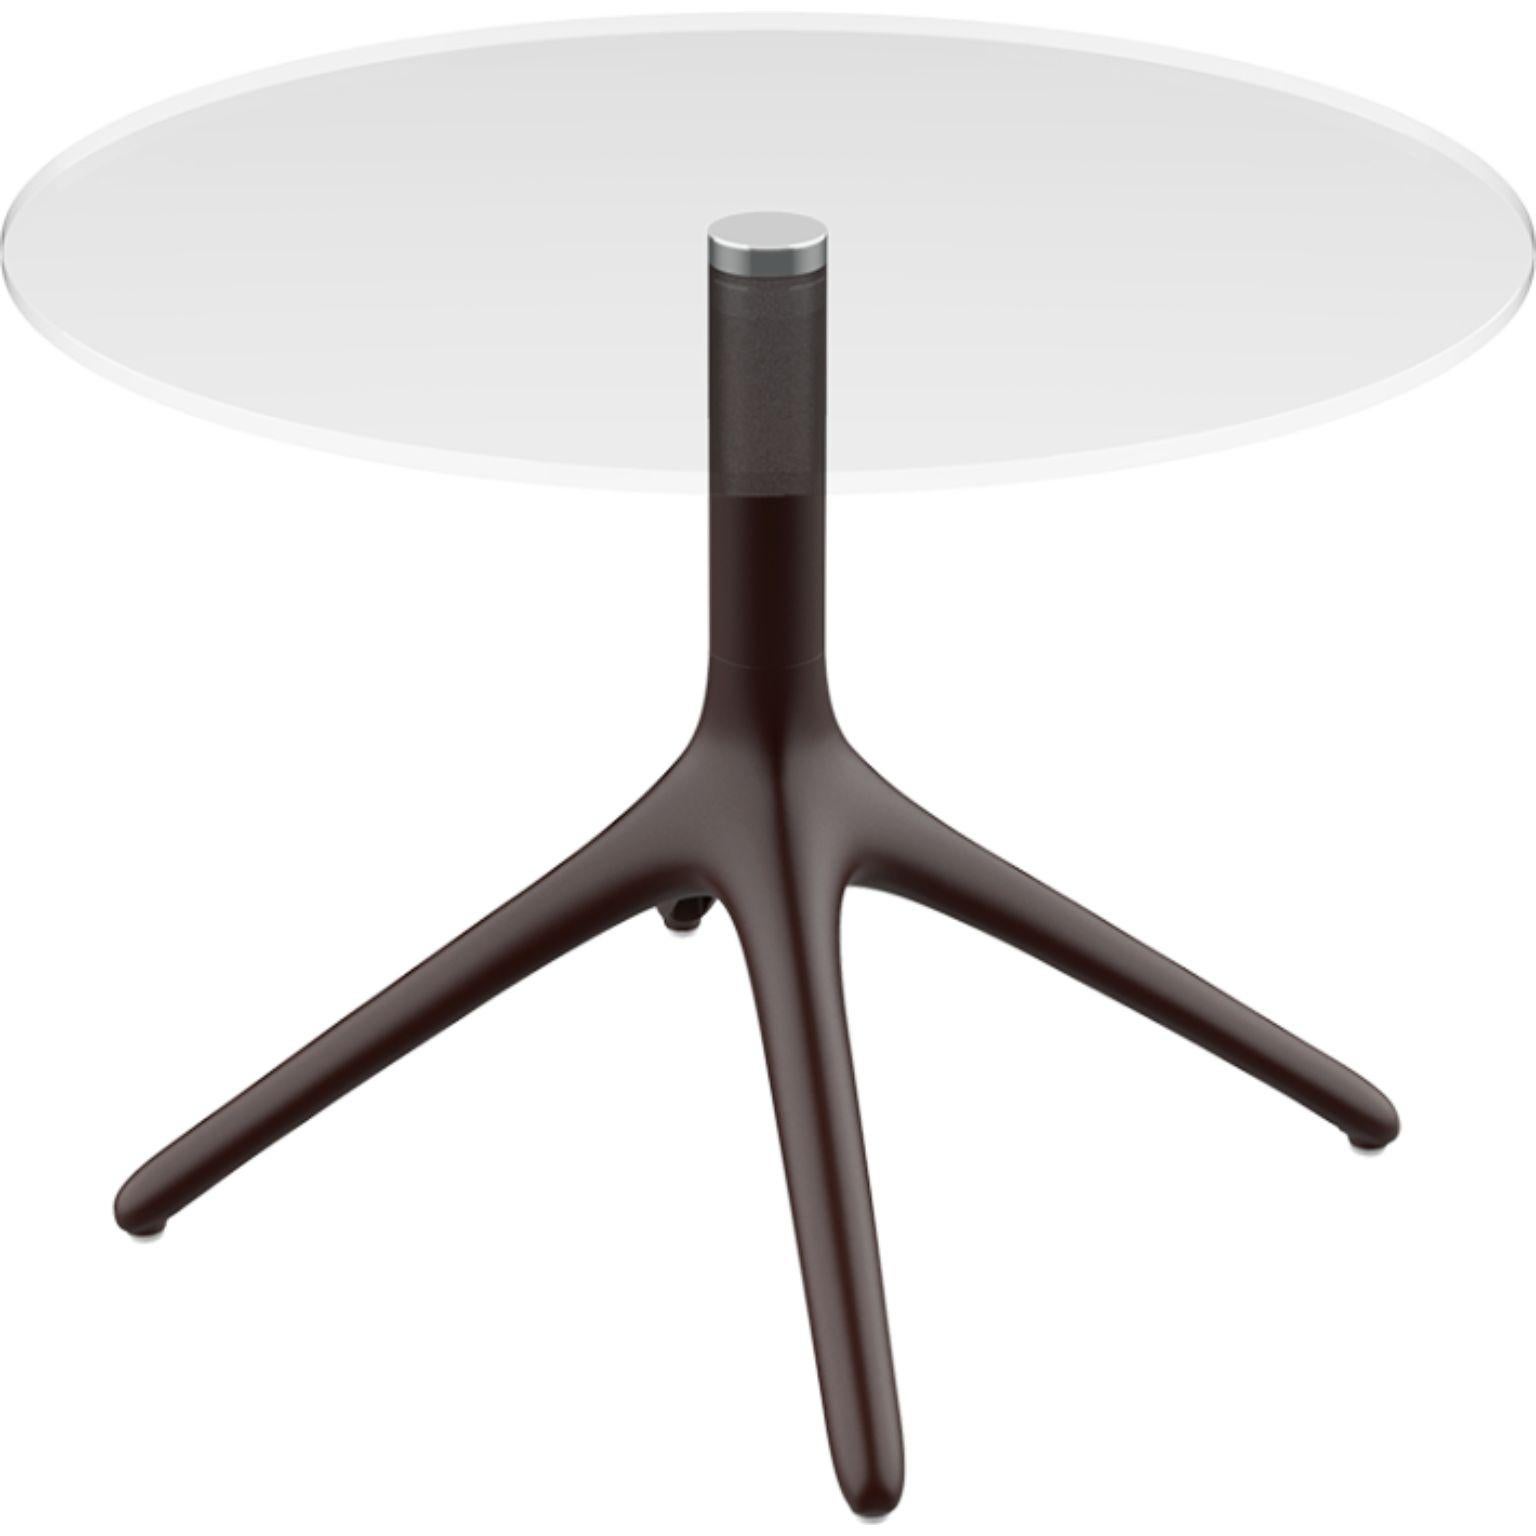 Uni black table 50 by Mowee.
Dimensions: D45.5 x H50 cm.
Material: Aluminium, Tempered Glass.
Weight: 5 kg.
Also Available in different colours and finishes. Collapsable version available. 

A table designed to be as versatile as possible and